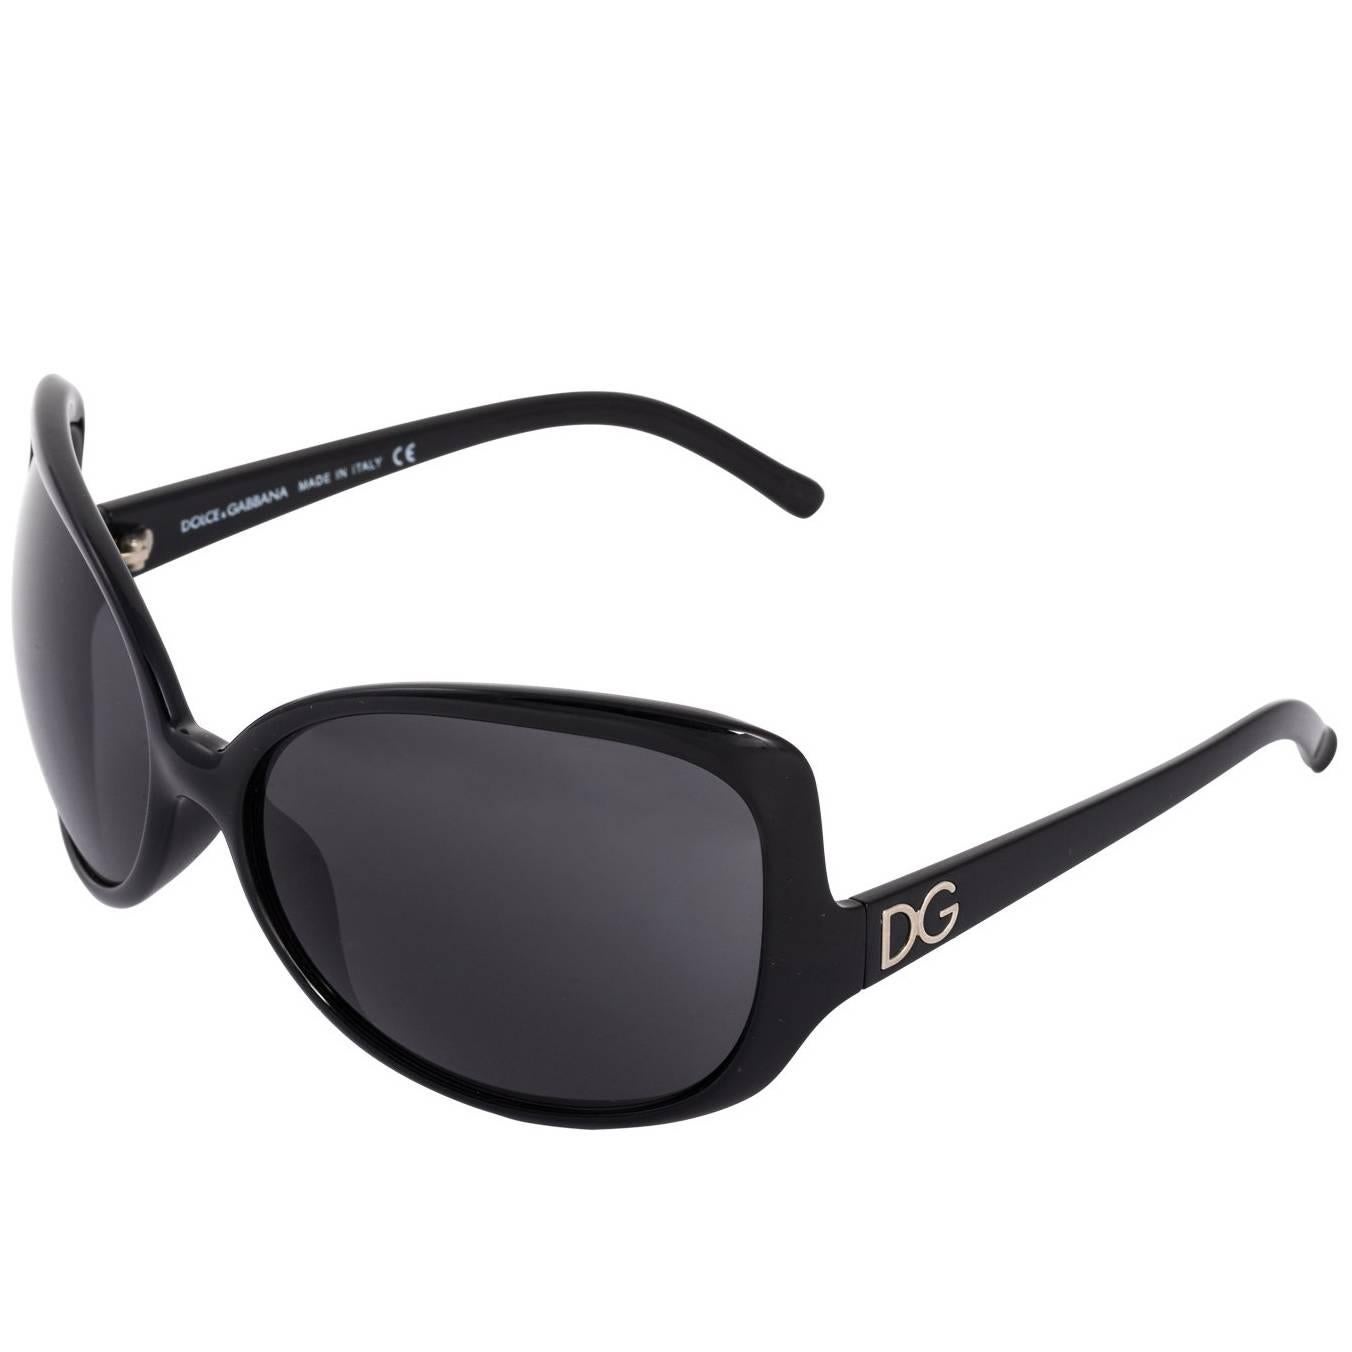  Black Dolce and Gabbana sunglasses For Sale